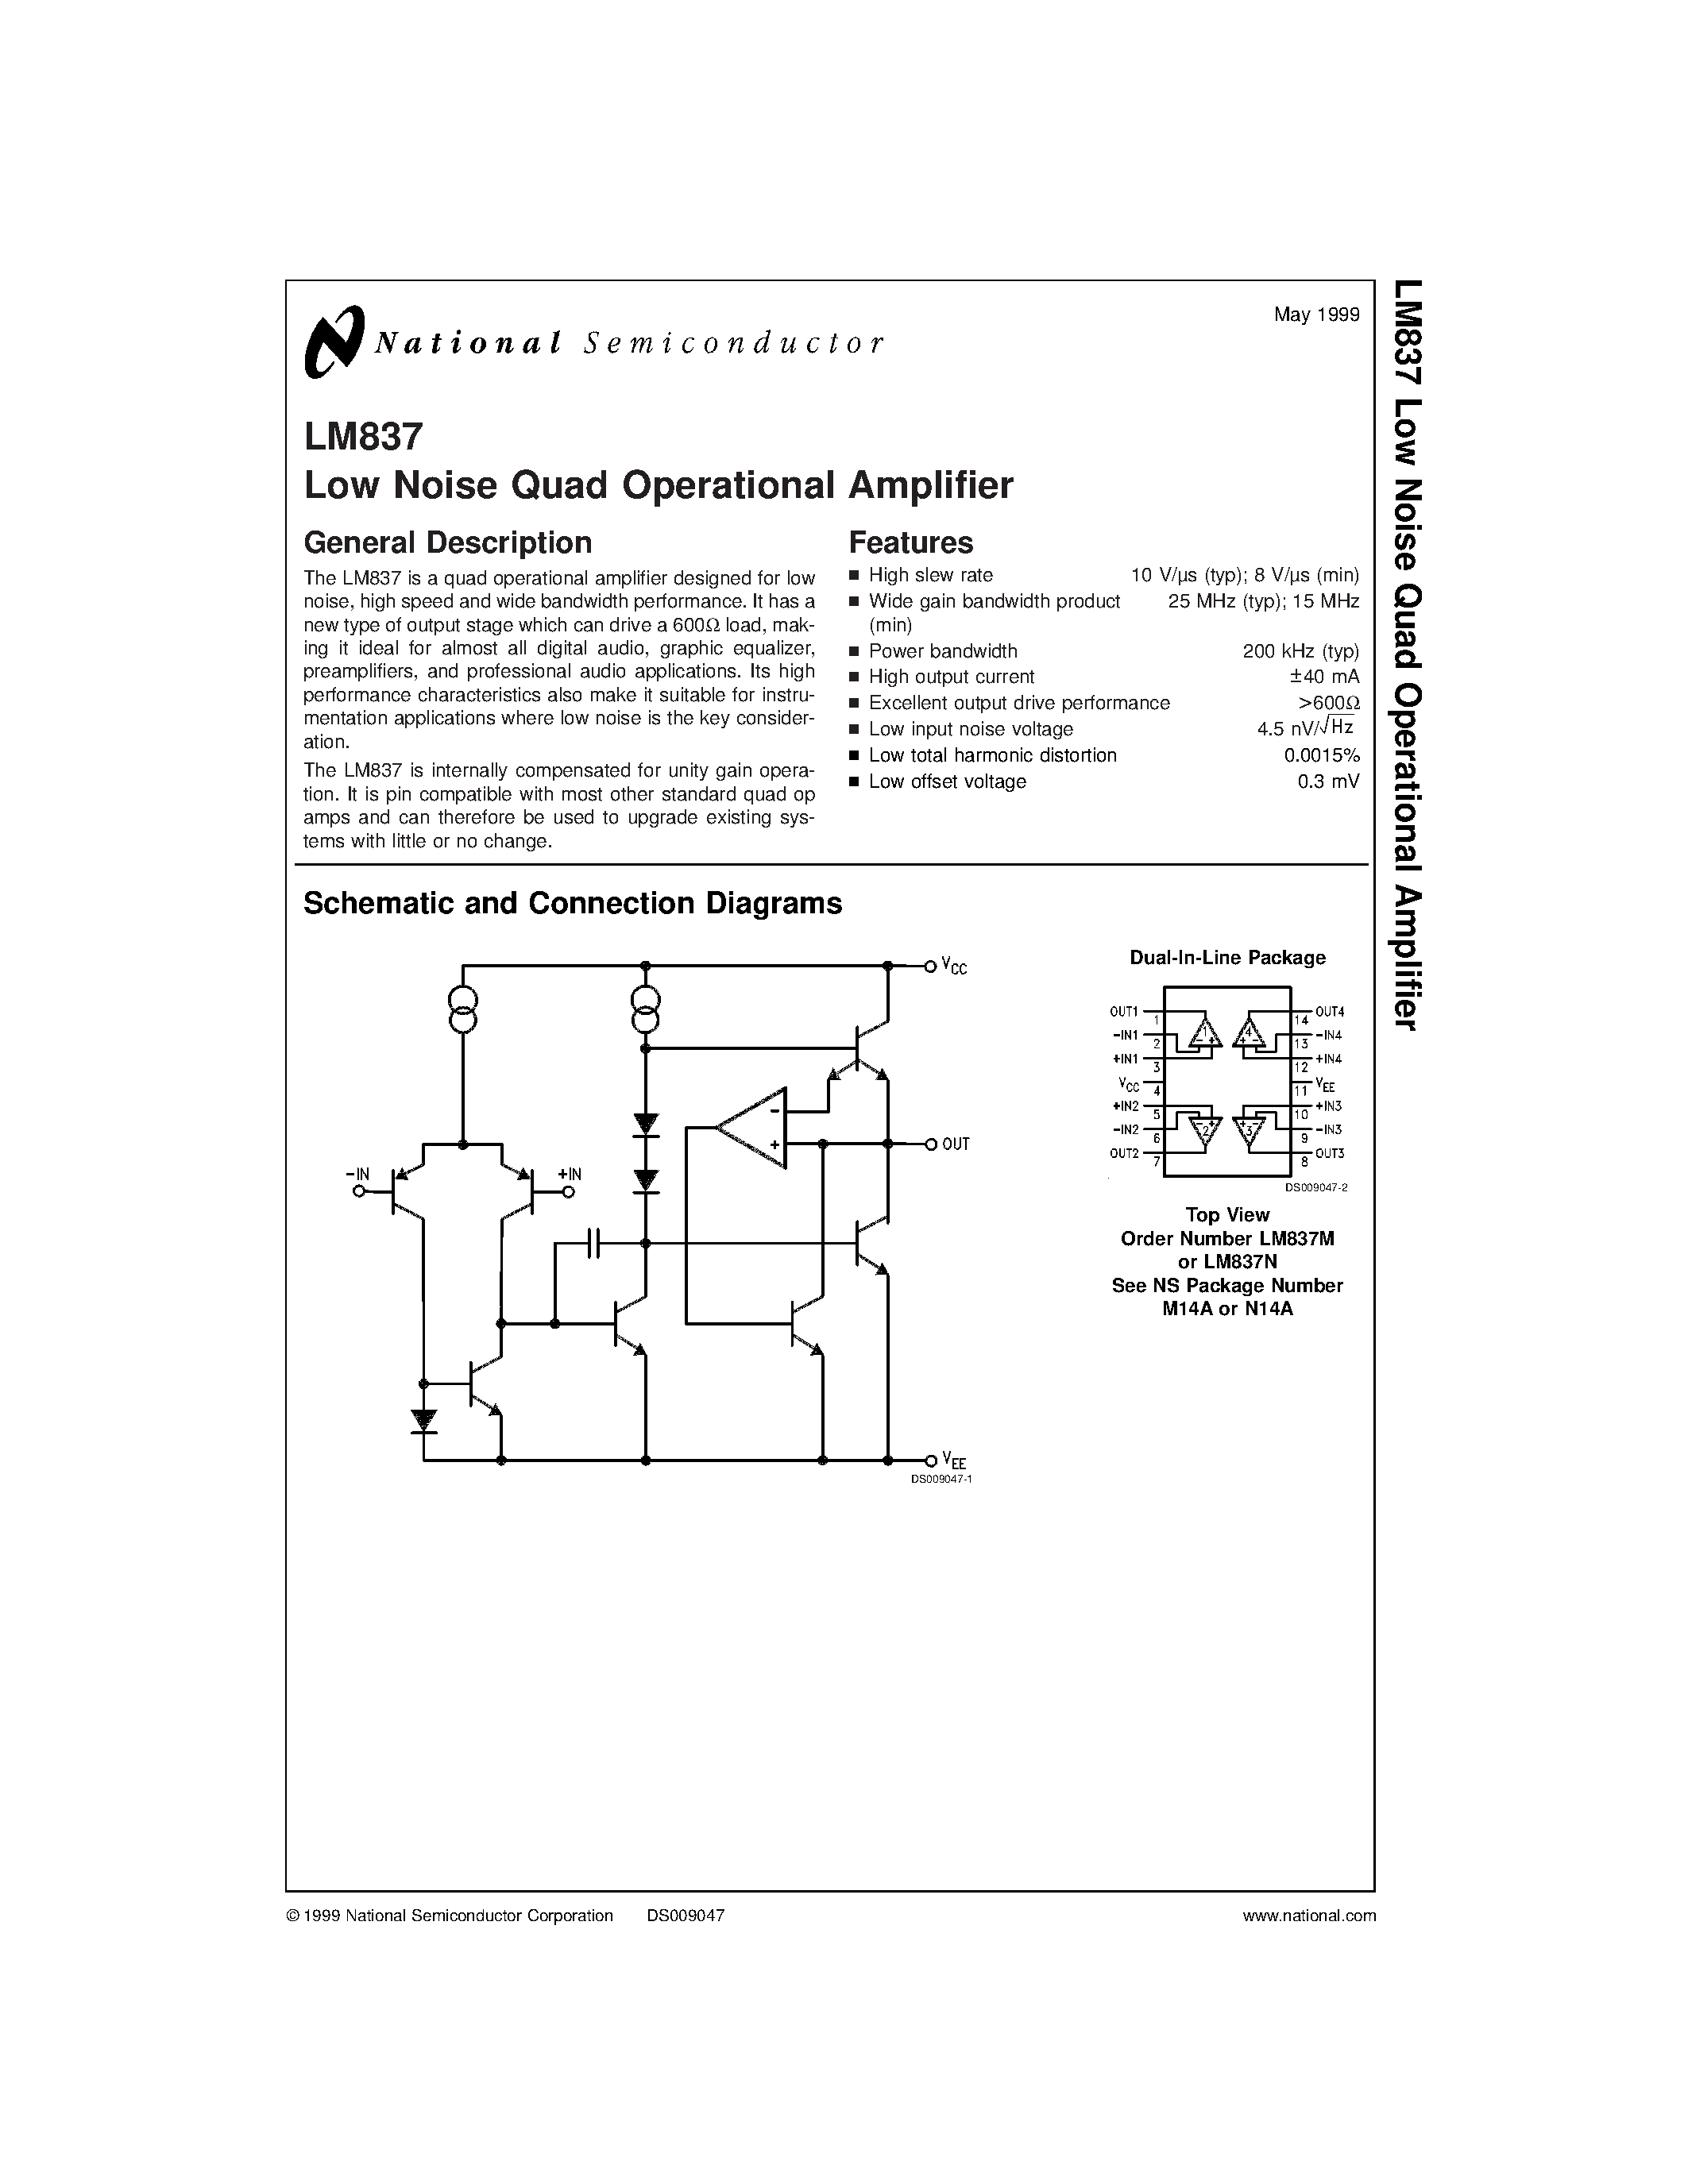 Datasheet LM837 - Low Noise Quad Operational Amplifier page 1